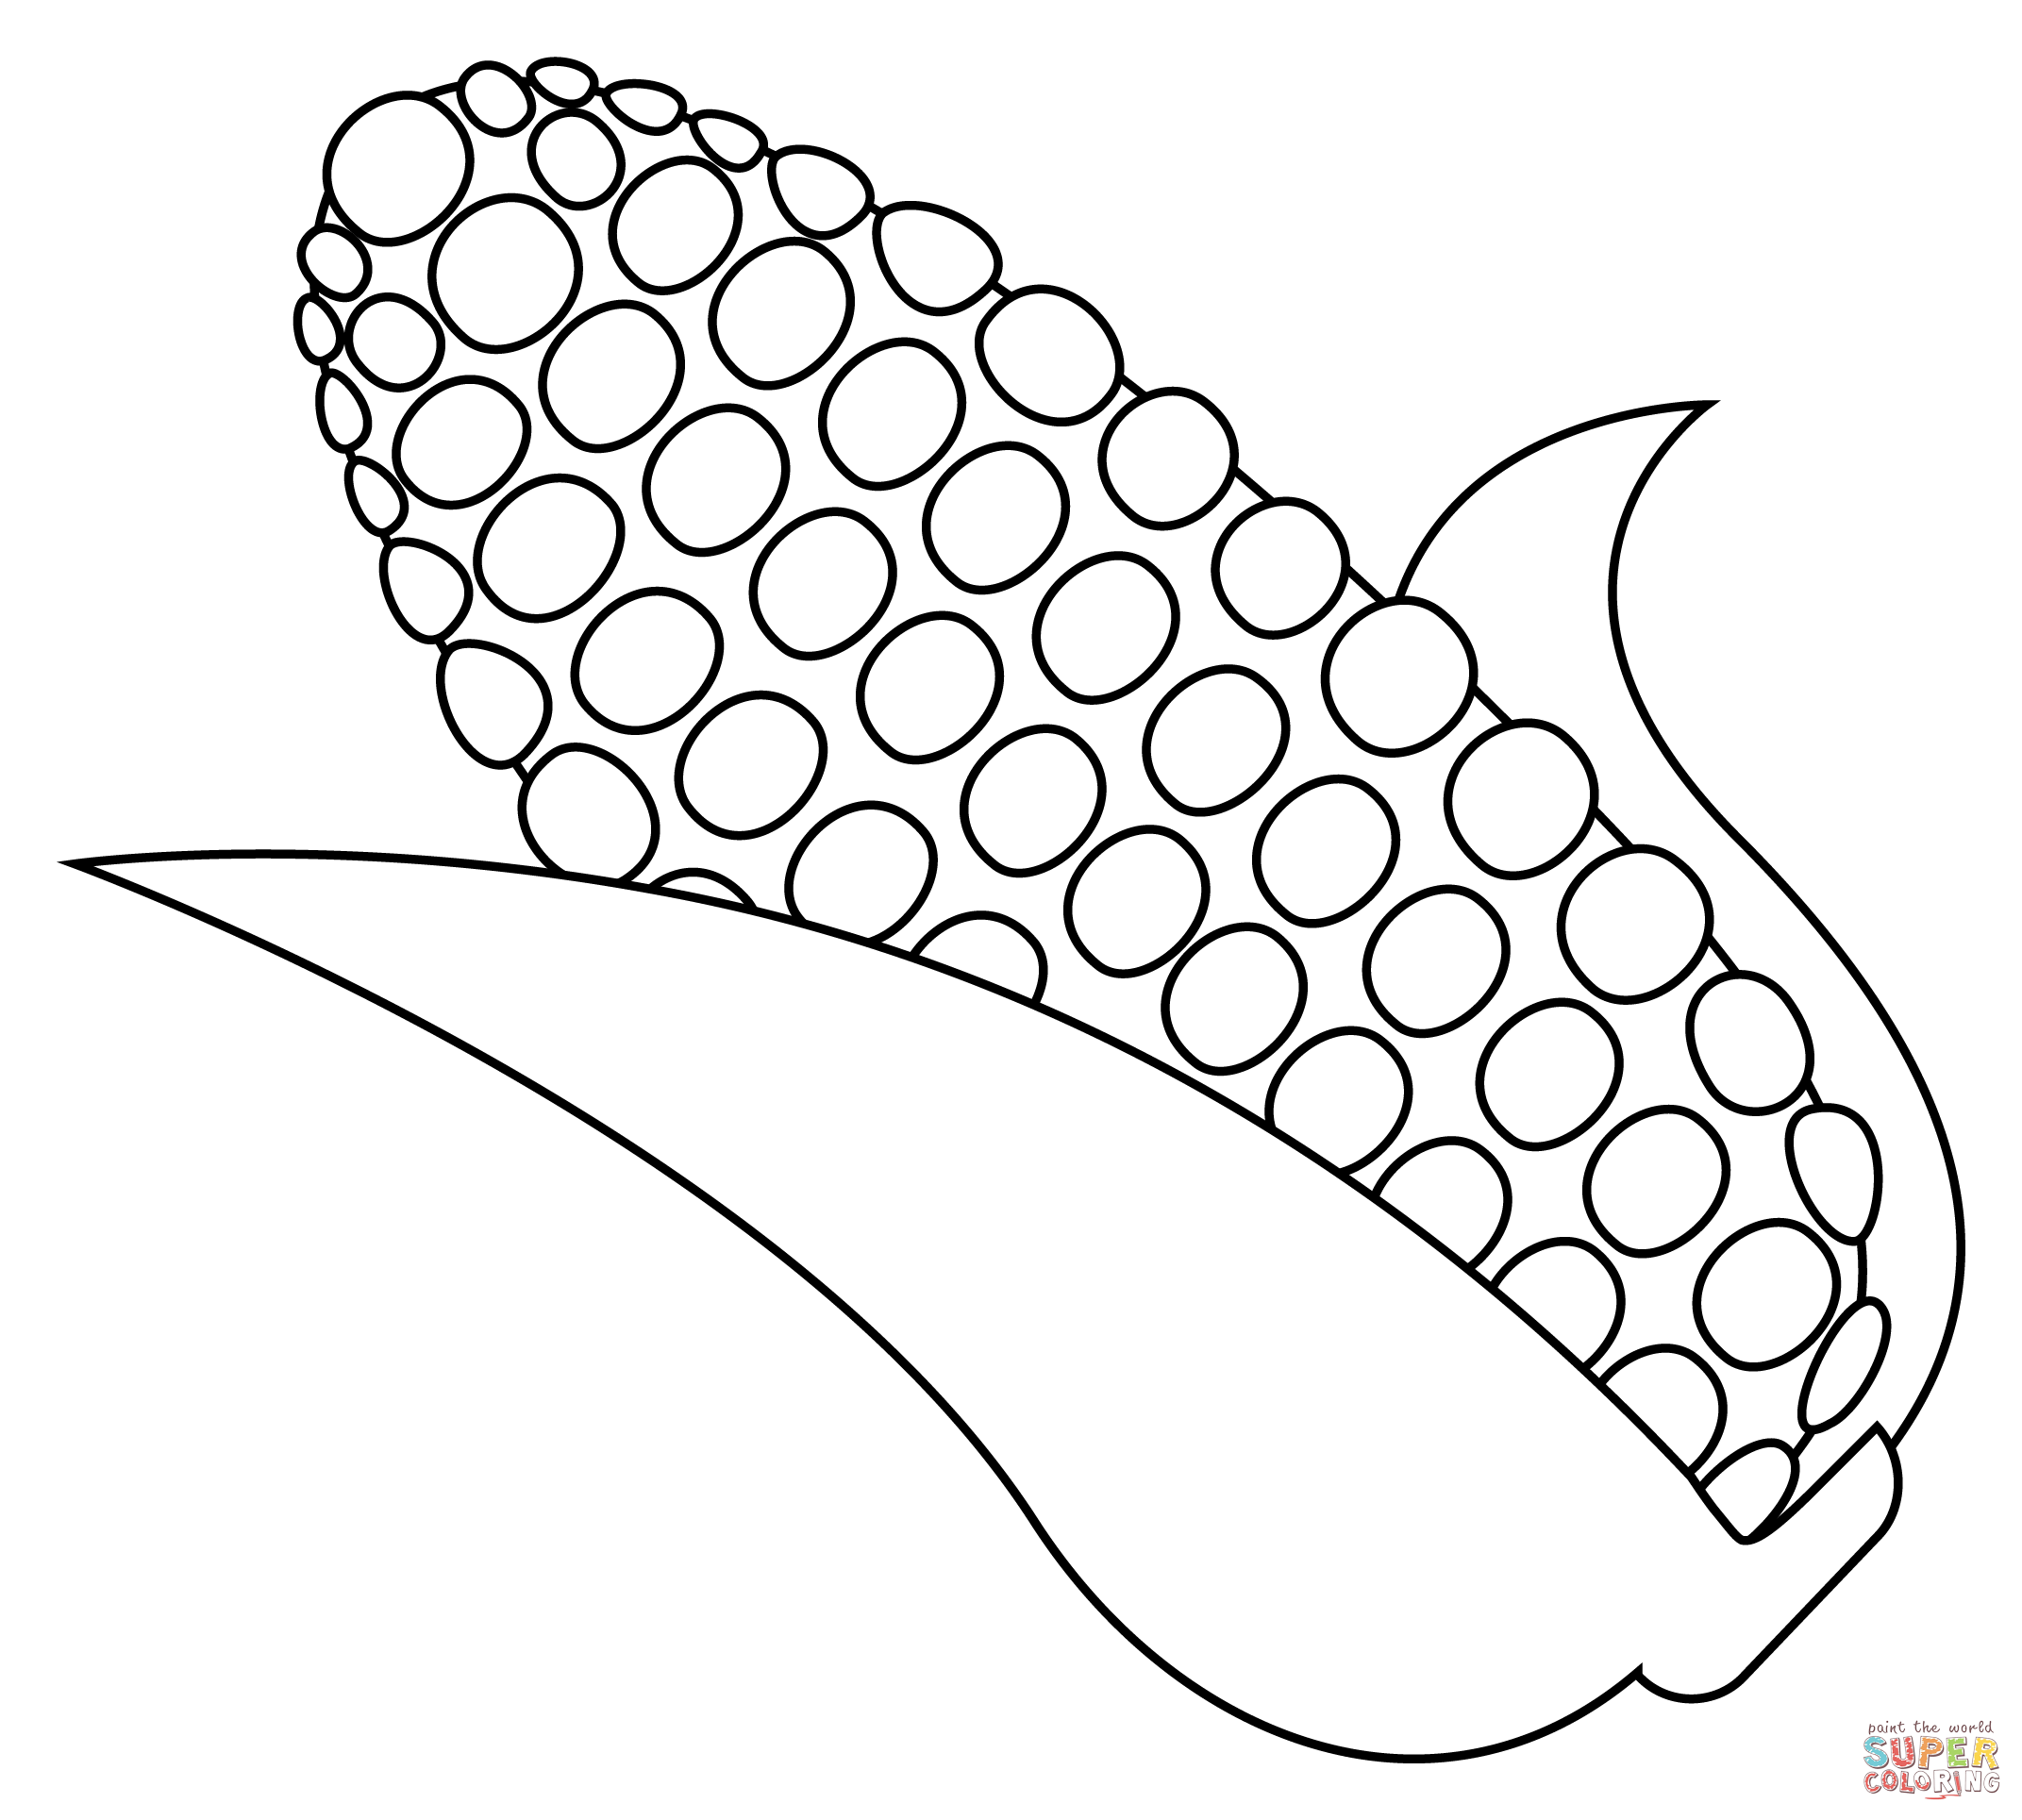 Ear of corn coloring page free printable coloring pages